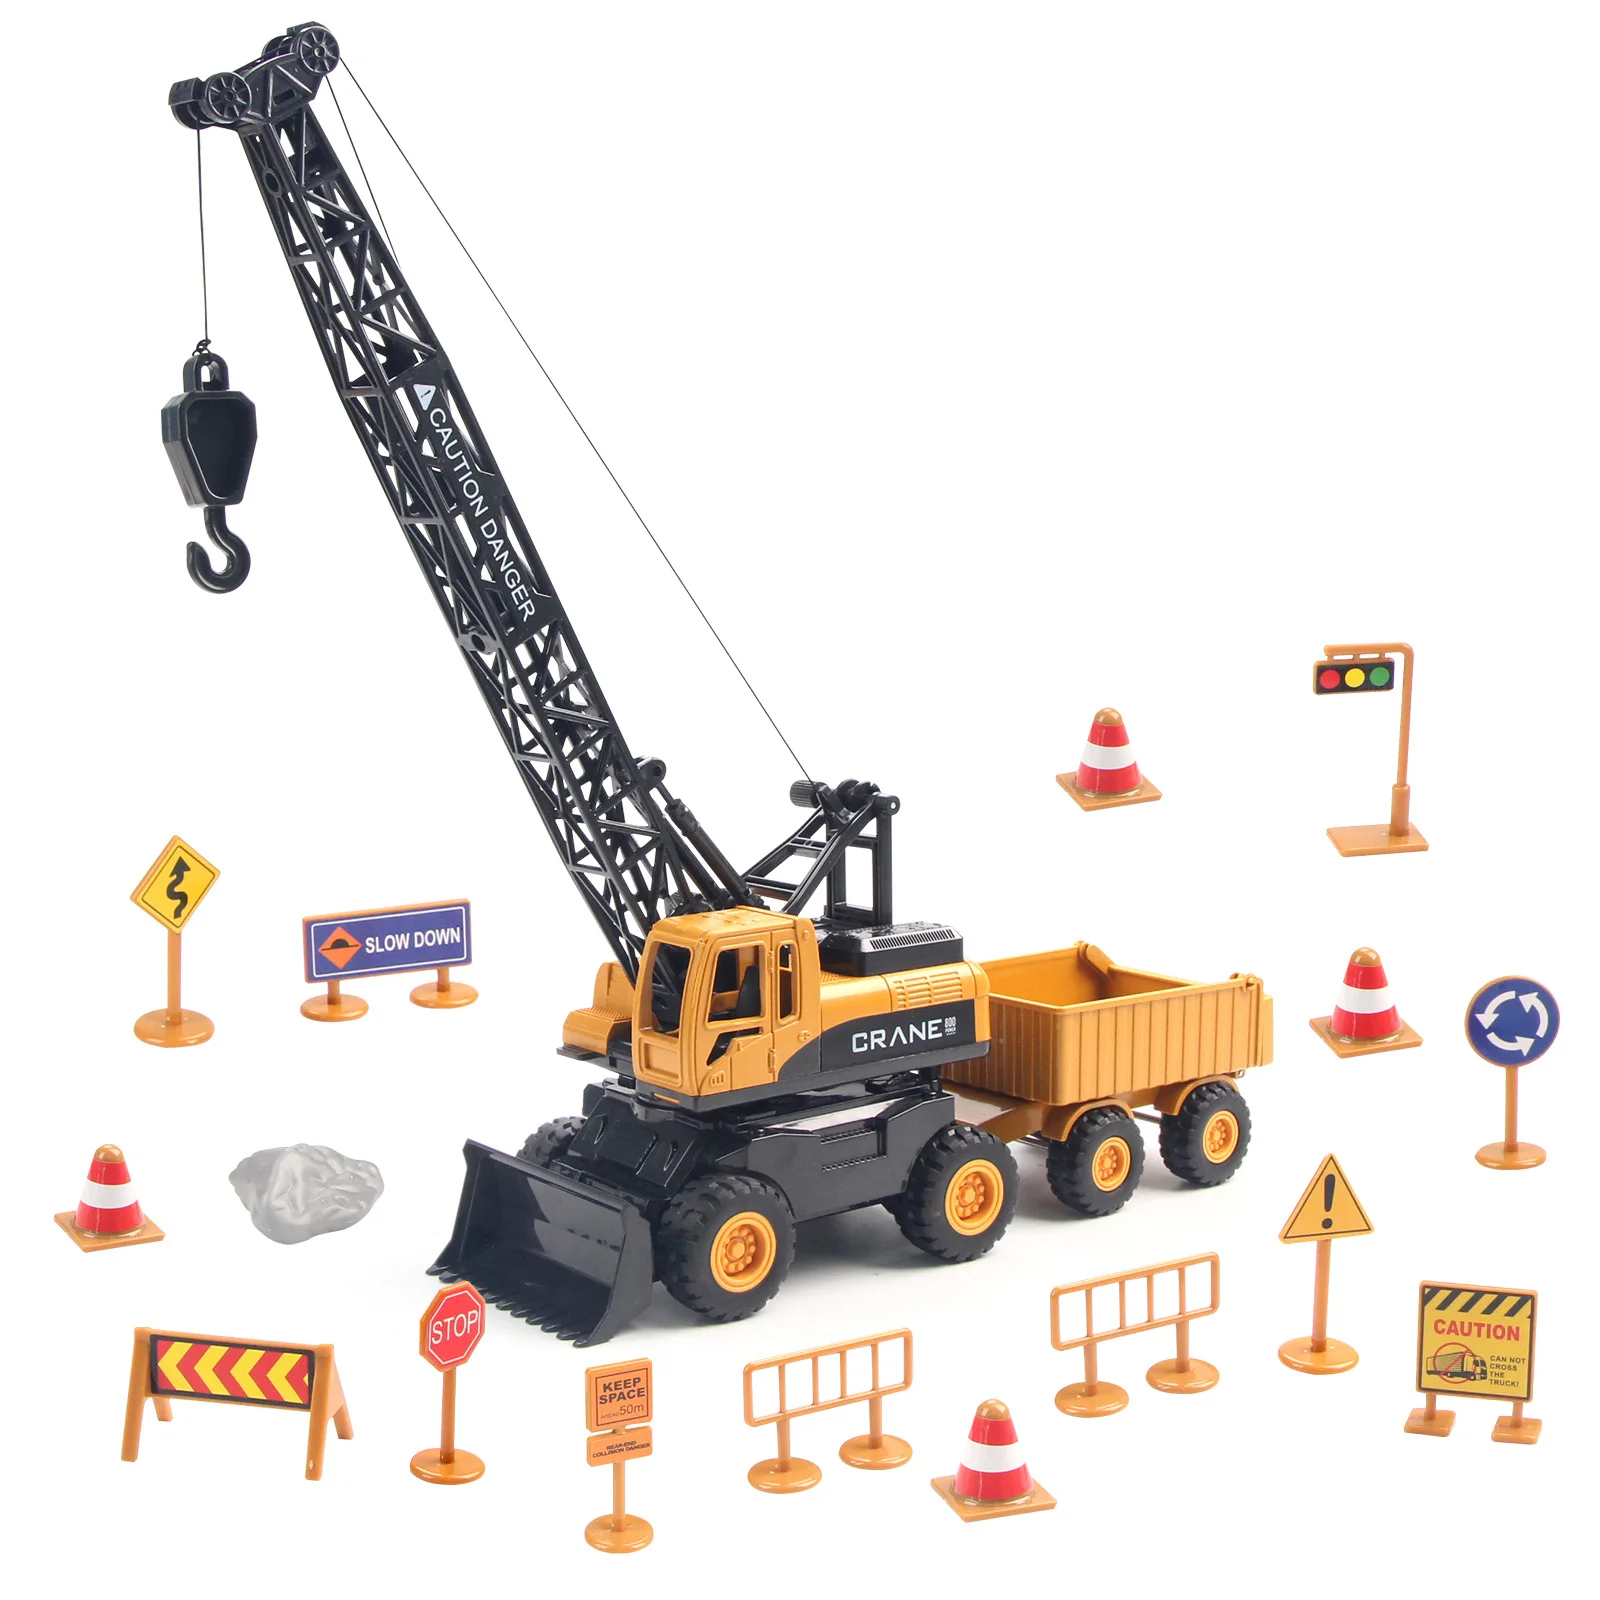 Crane Toy with Detachable Dump Truck Construction Vehicles Model Education Toys Collection Gift for Kids Children